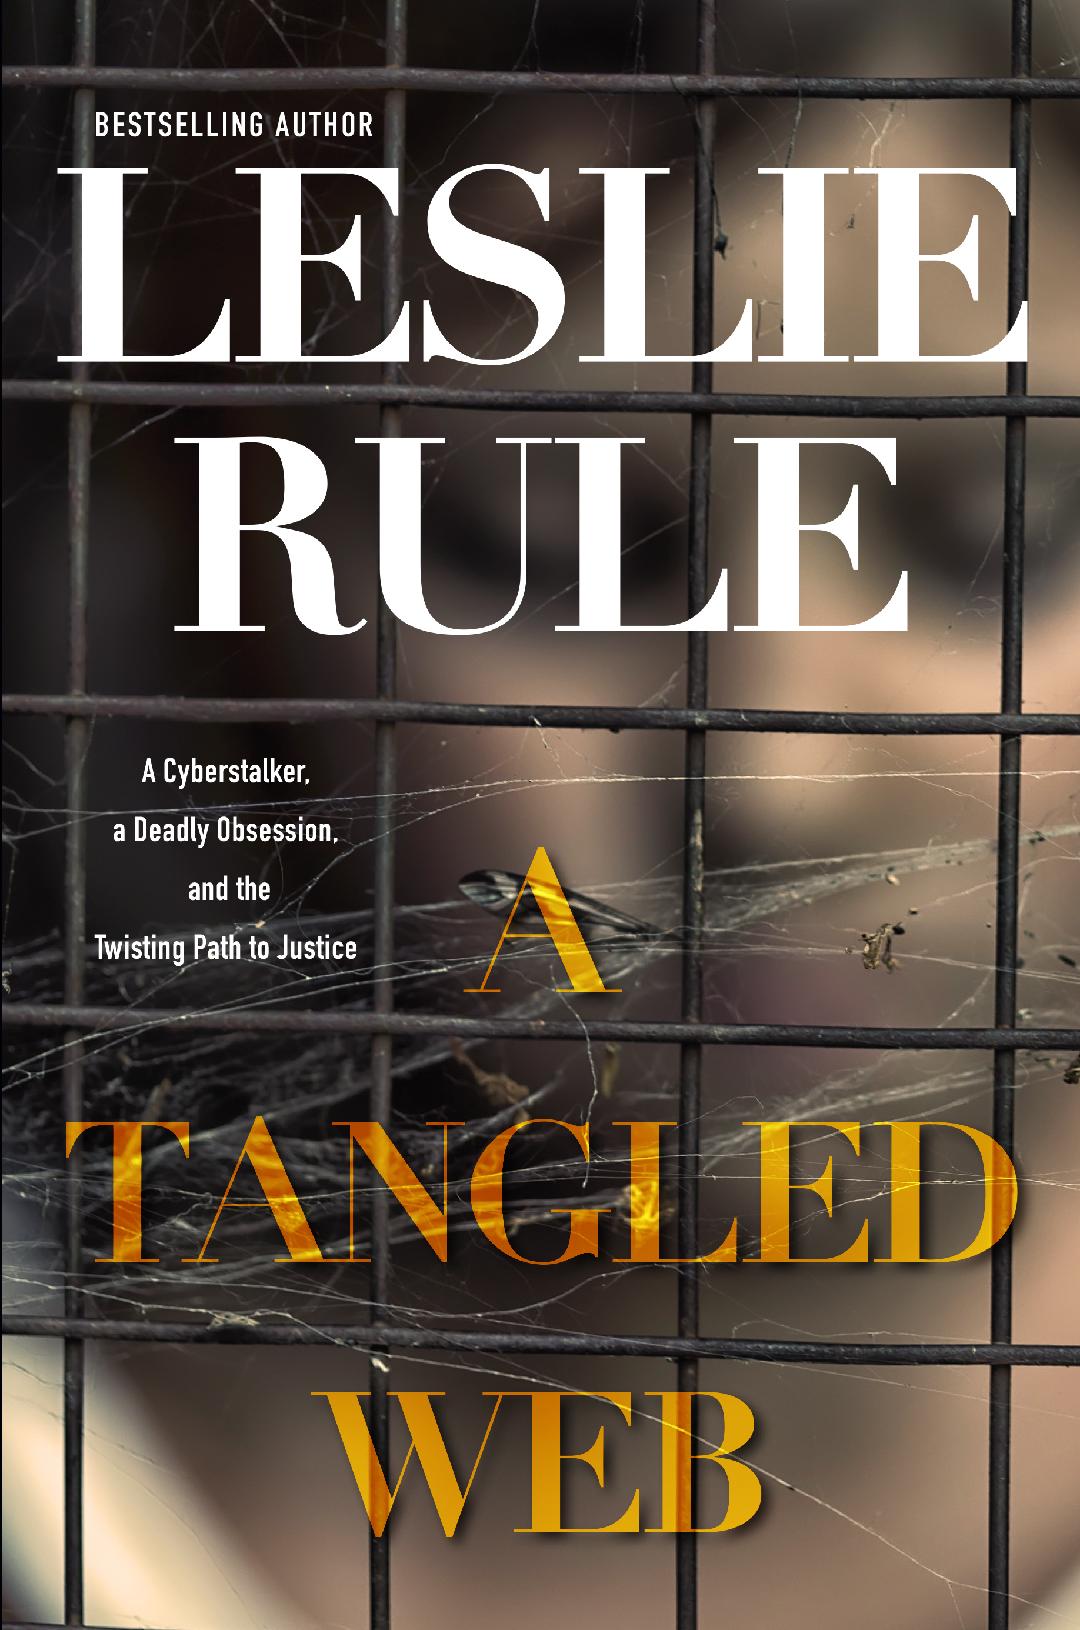 Leslie Rule covered the twisted case in her enthralling book, A Tangled Web, which was released in 2012